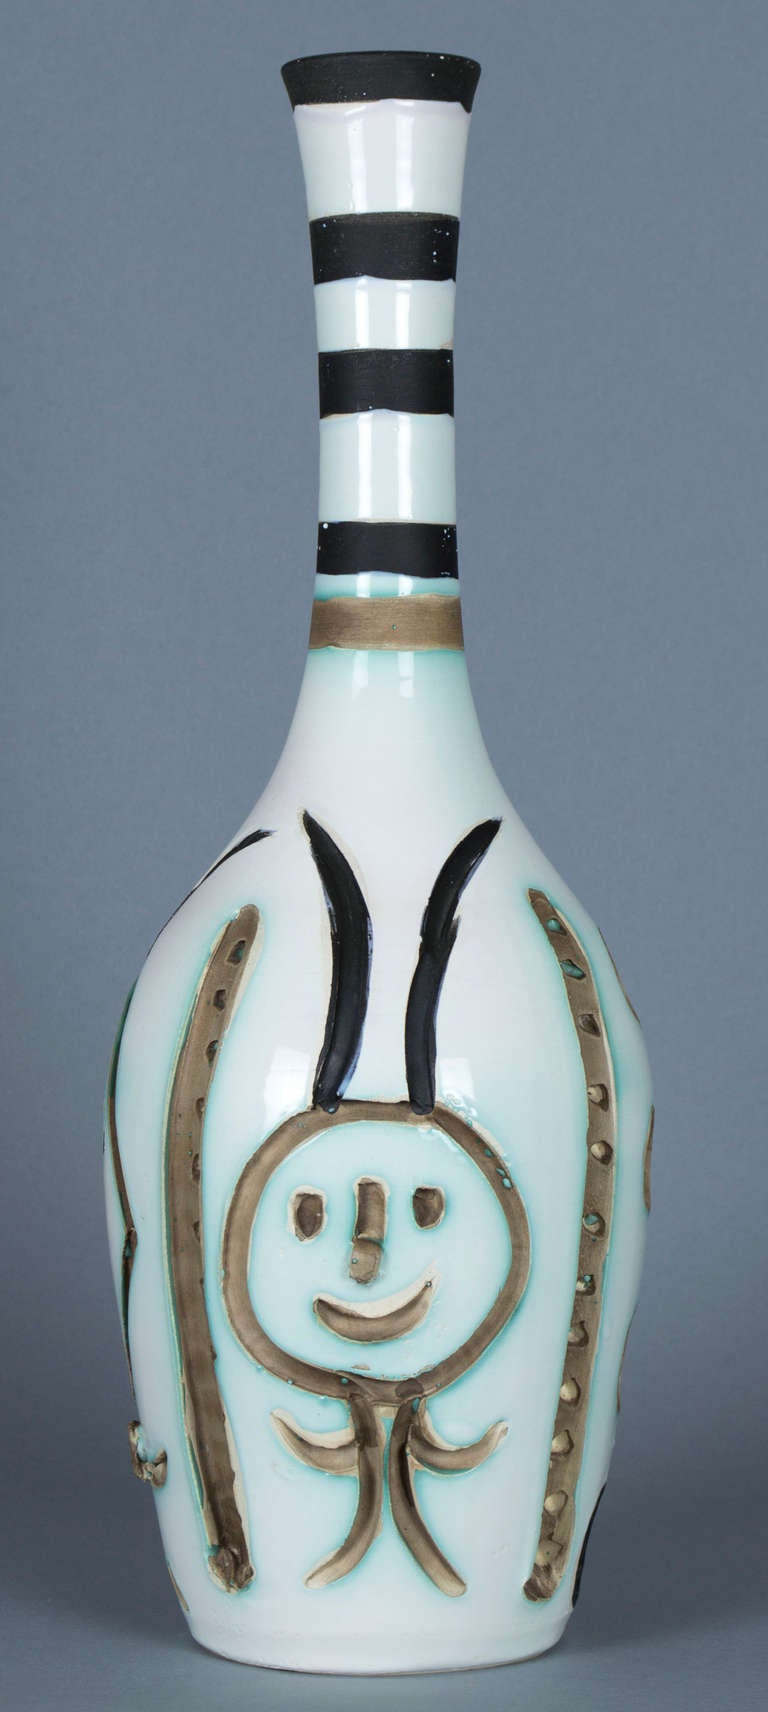 Engraved Bottle, 1954 - Sculpture by Pablo Picasso